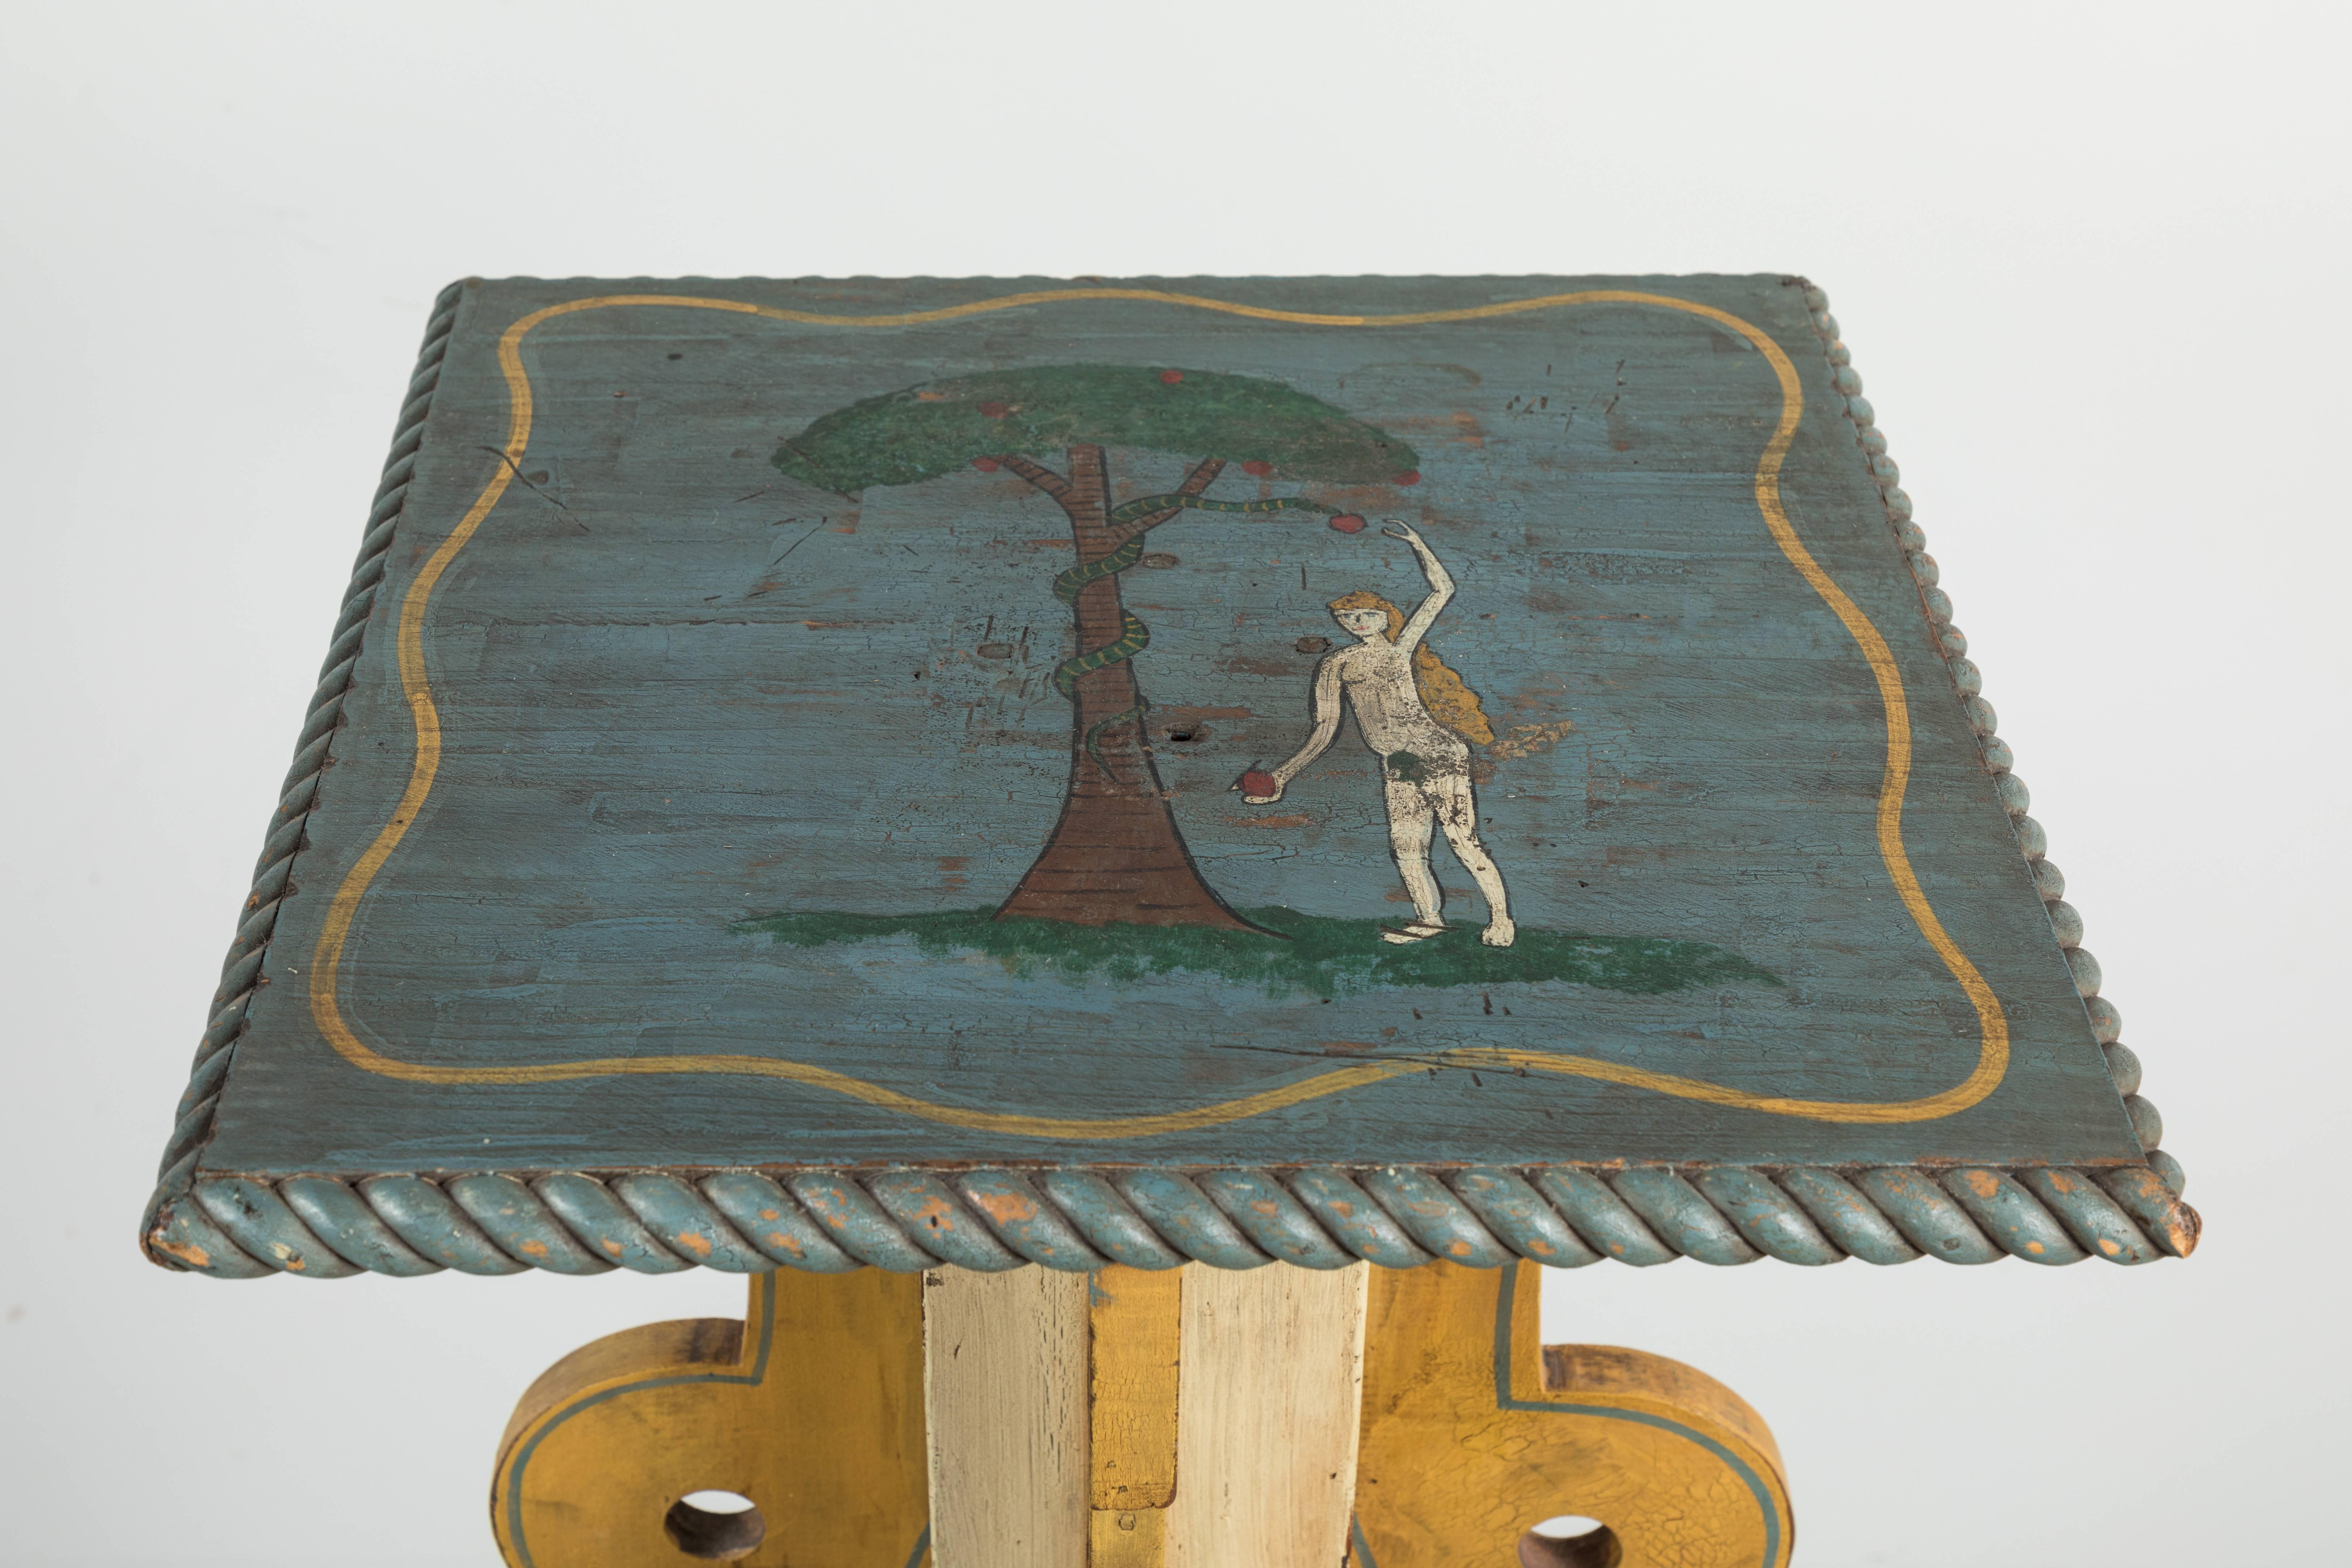 Fantastic hand-painted and carved lodge piece from the Midwest. Painting depicts Eve picking the apple from the snakes mouth. The Stand has a hand-carved snake that wraps around the base. Most likely an Odd Fellows or Masonic Lodge ritual table.